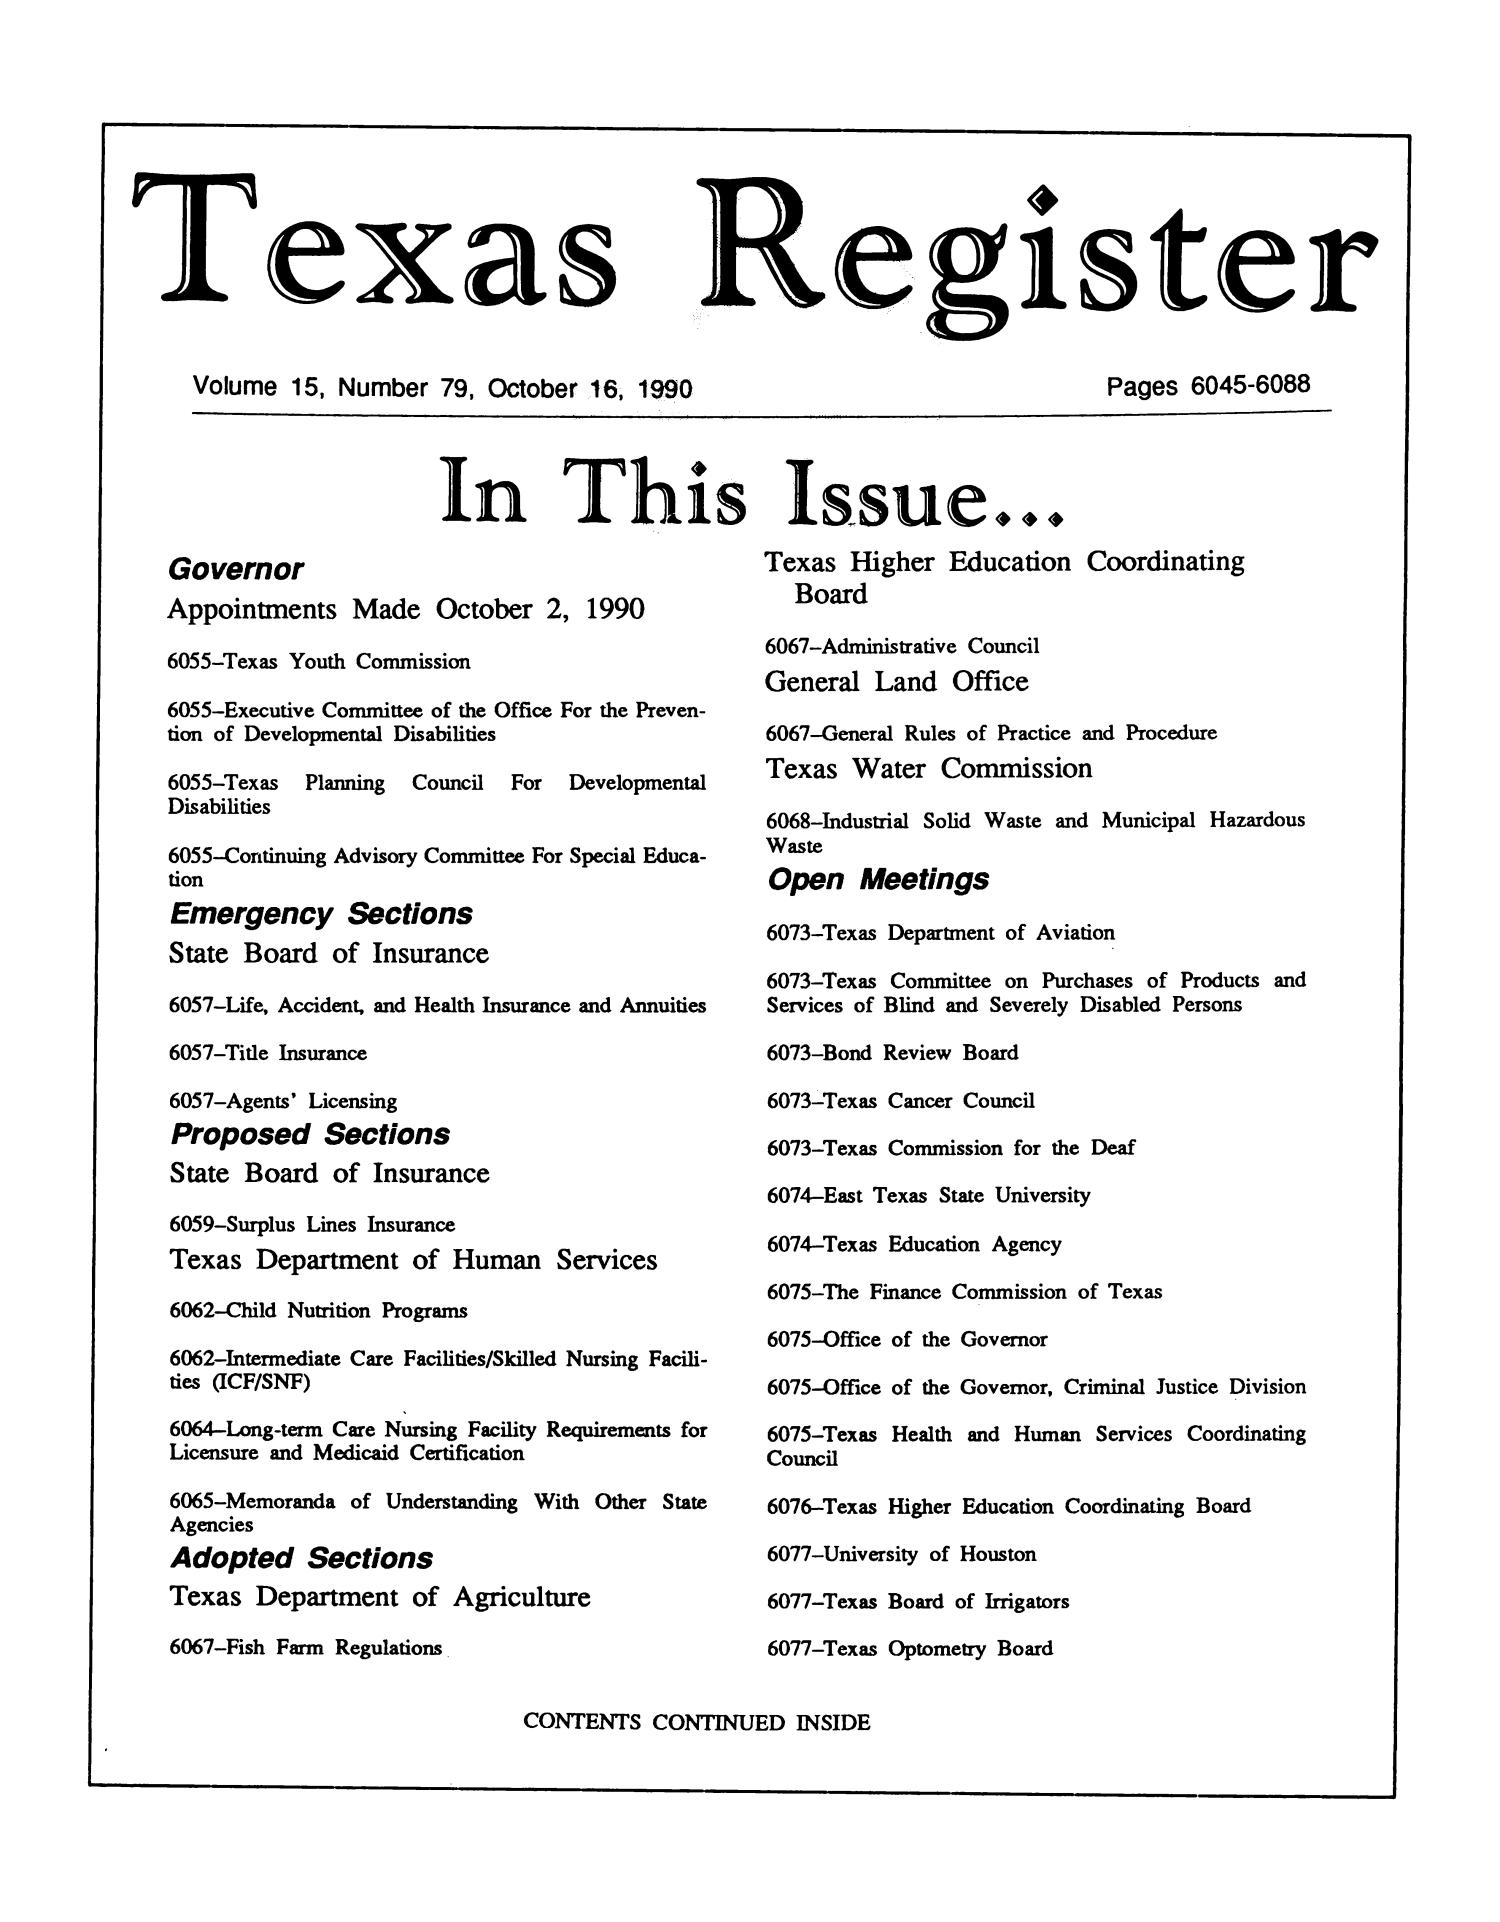 Texas Register, Volume 15, Number 79, Pages 6045-6088, October 16, 1990
                                                
                                                    Title Page
                                                